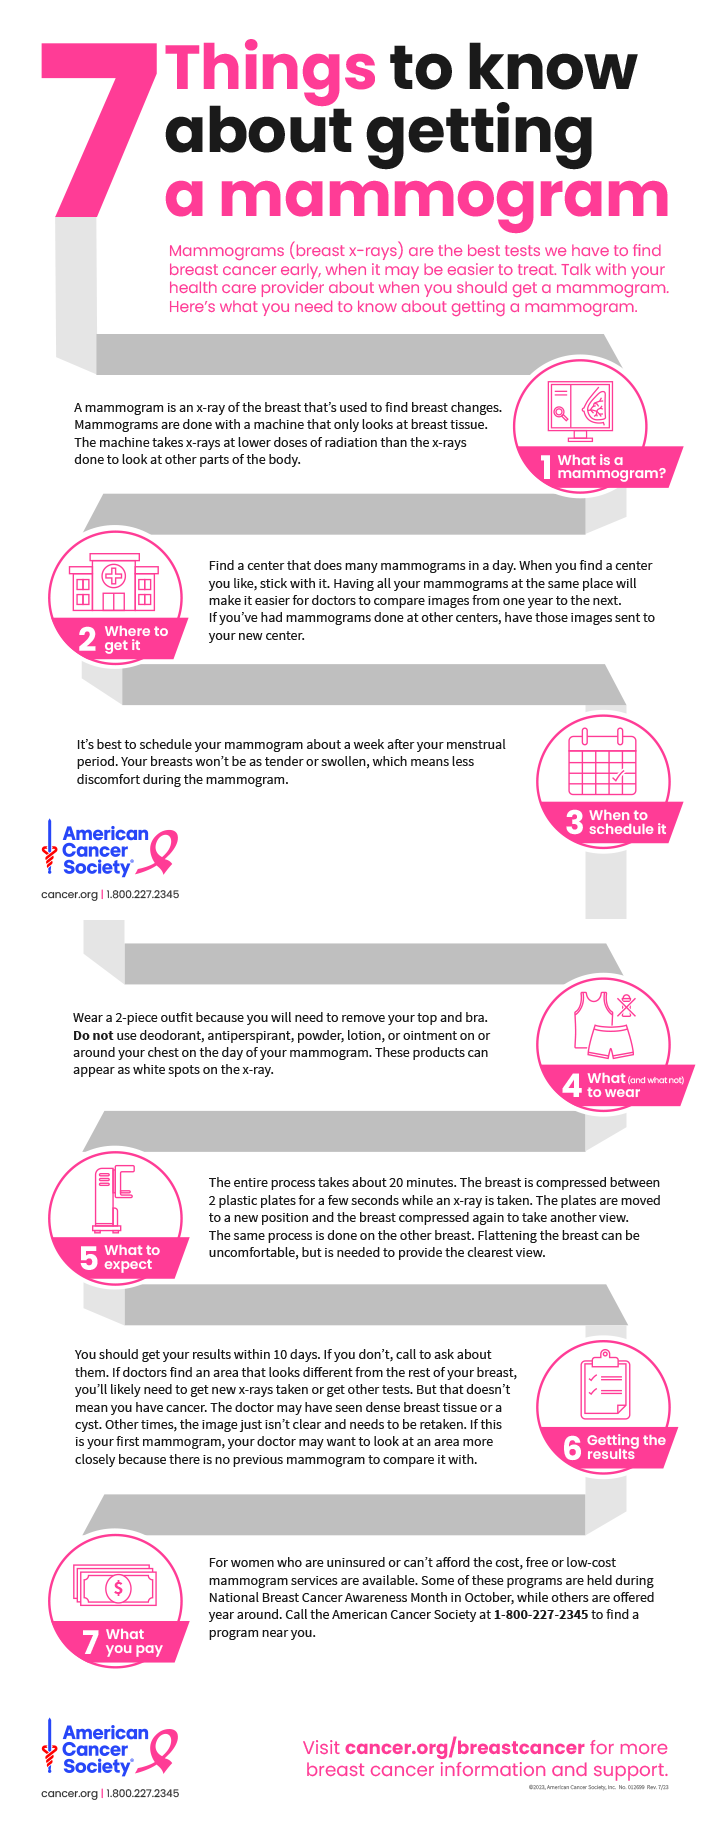 Infographic that lists 7 things to know before you go for your mammogram to make the process go more smoothly